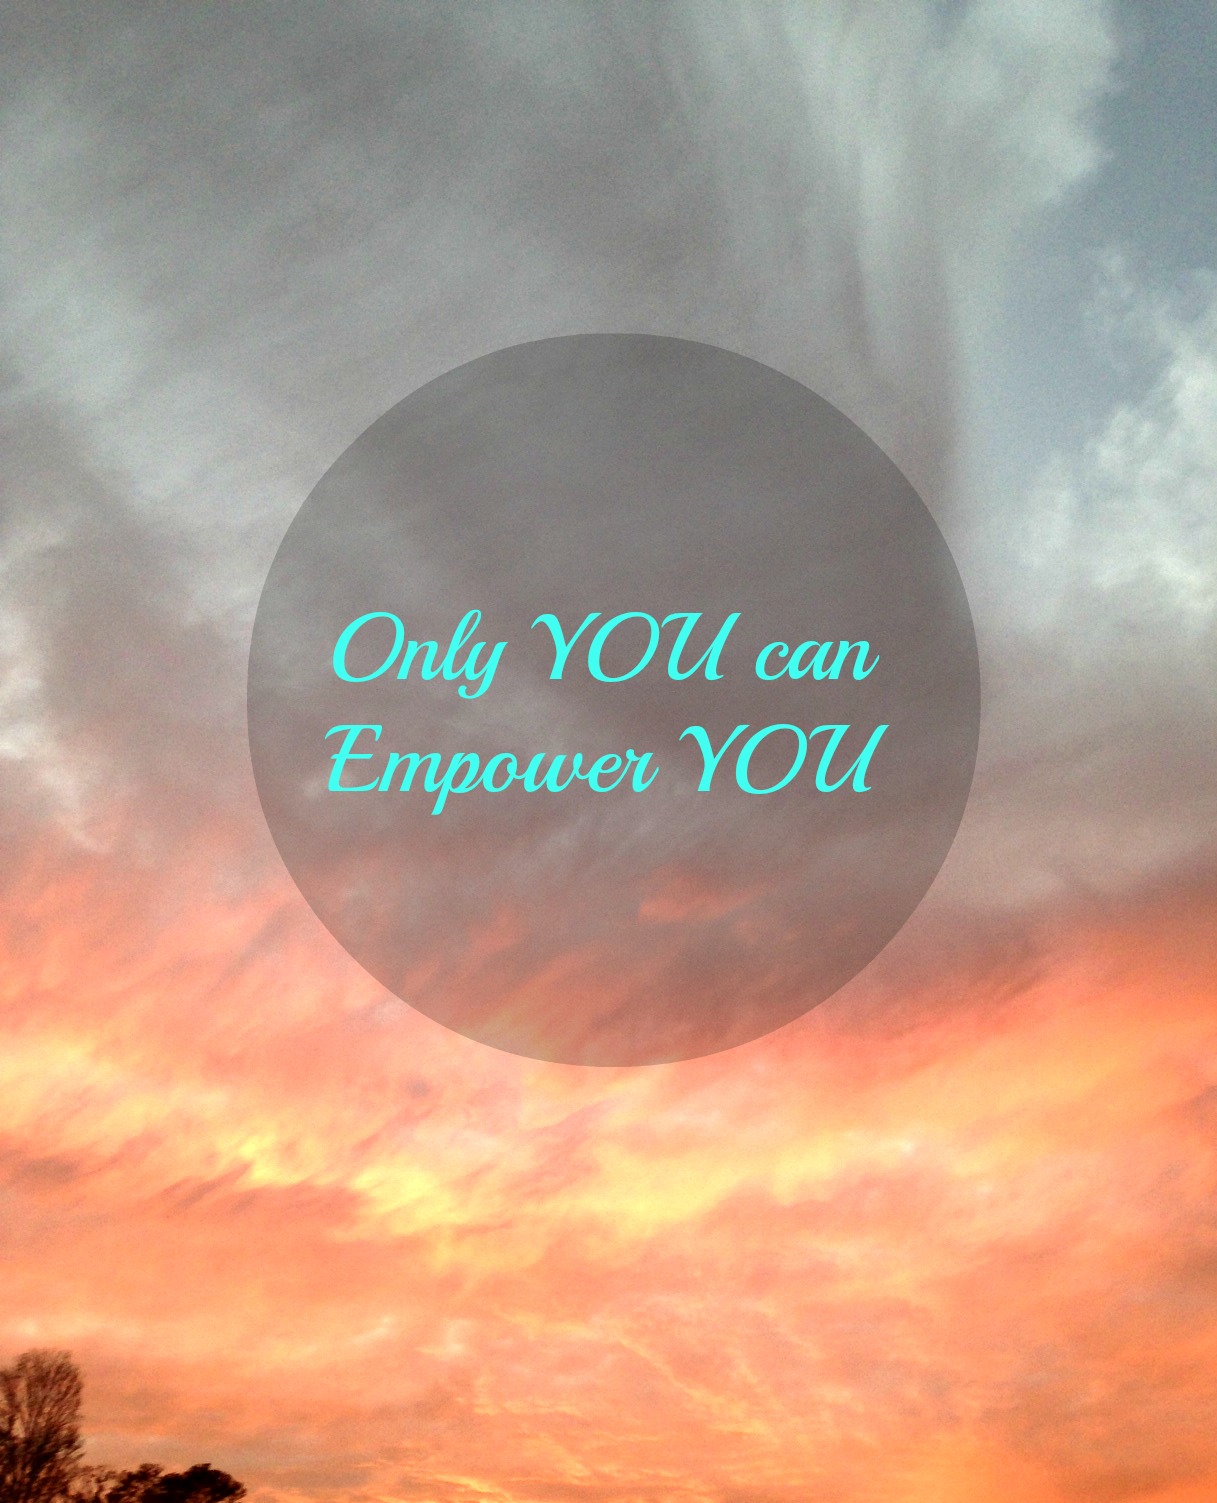 Empower quote on sunset photo